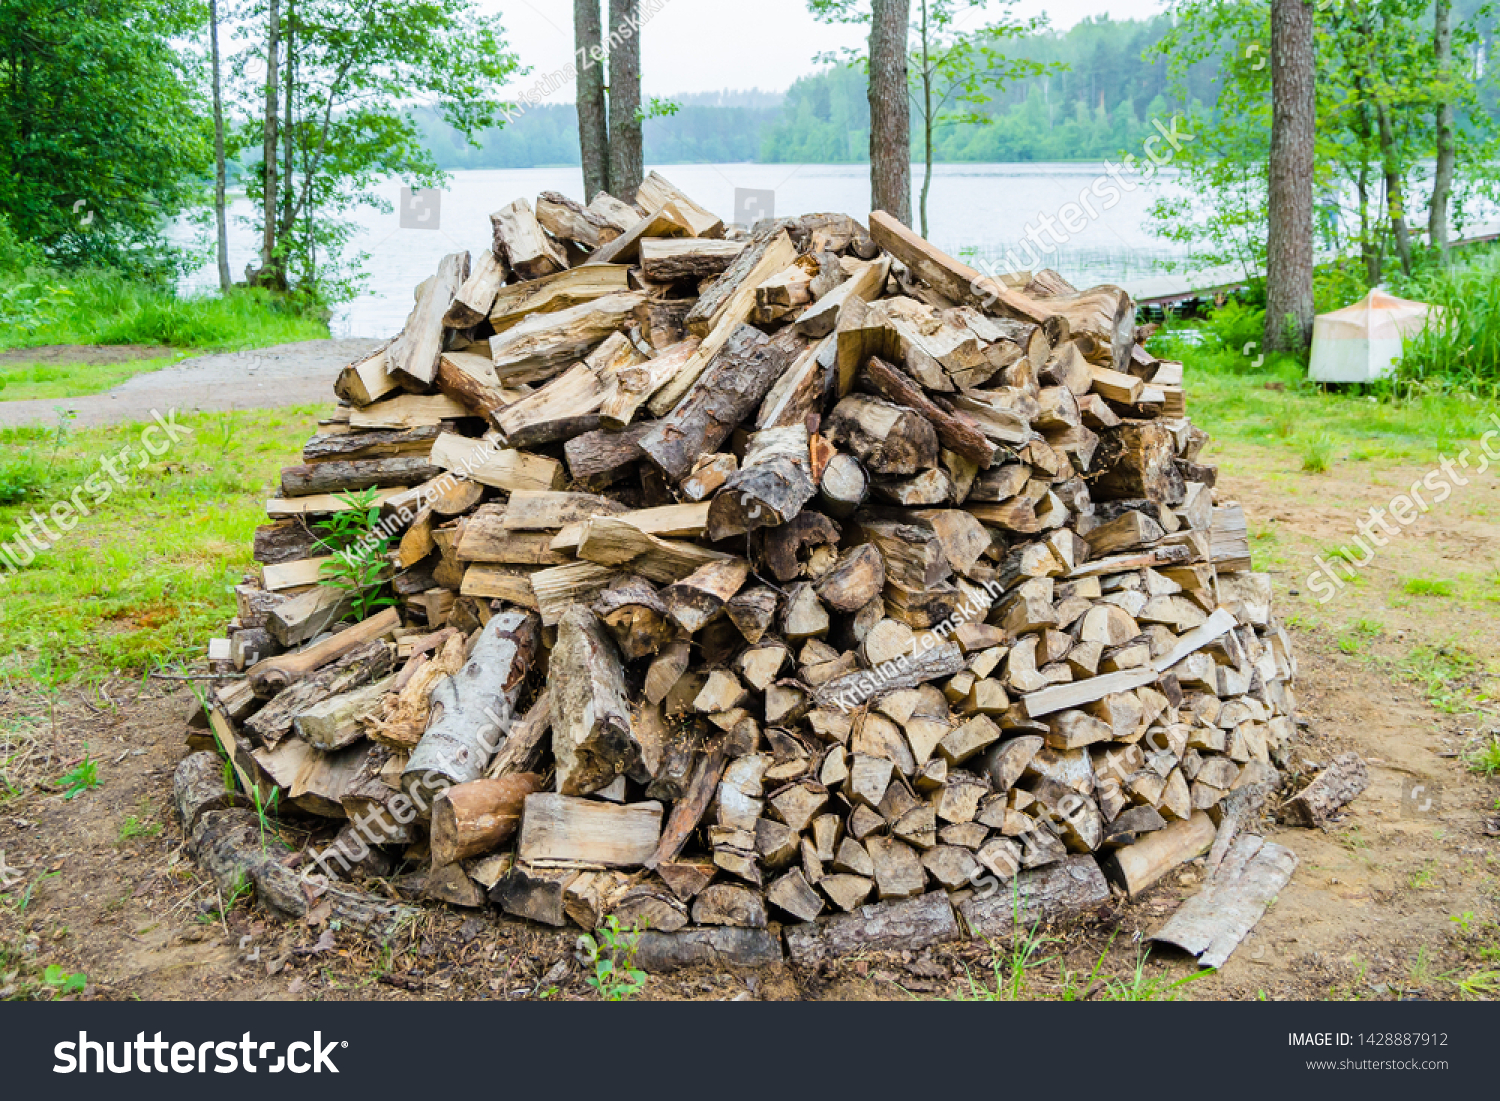 firewood piled in one pile outdoors against the backdrop of nature #1428887912